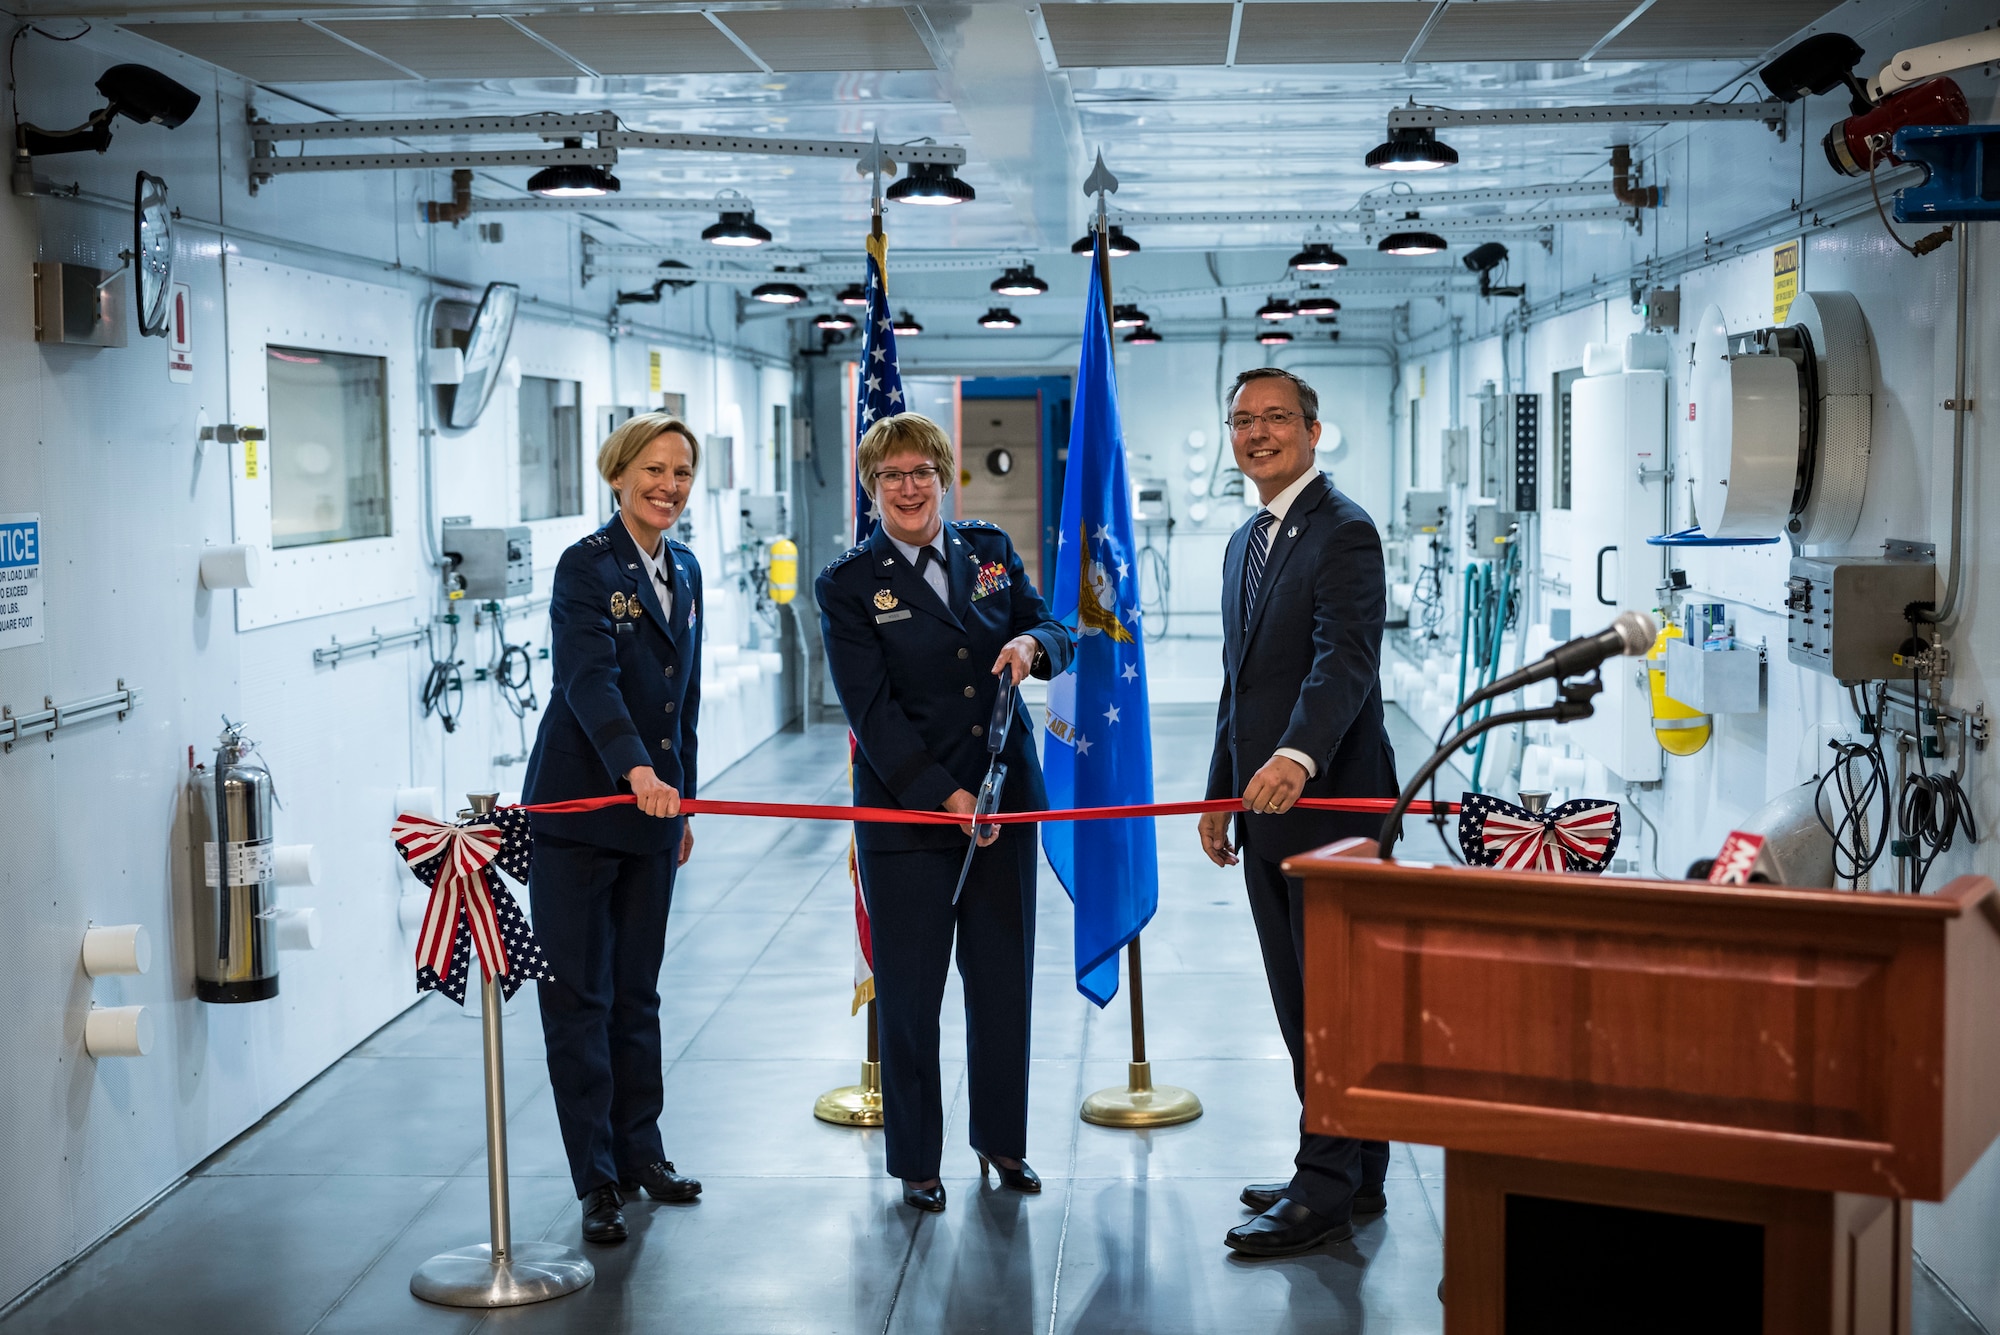 Lt. Gen. Dorothy Hogg, Air Force Surgeon General, cuts the ribbon with Air Force Research Laboratory Commander Maj. Gen. Heather Pringle and 711th Human Performance Wing Acting Director Darrell Phillipson, during a ceremony May 27 signifying the opening of the research altitude chambers in AFRL. (U.S. Air Force photo by Richard Eldridge)